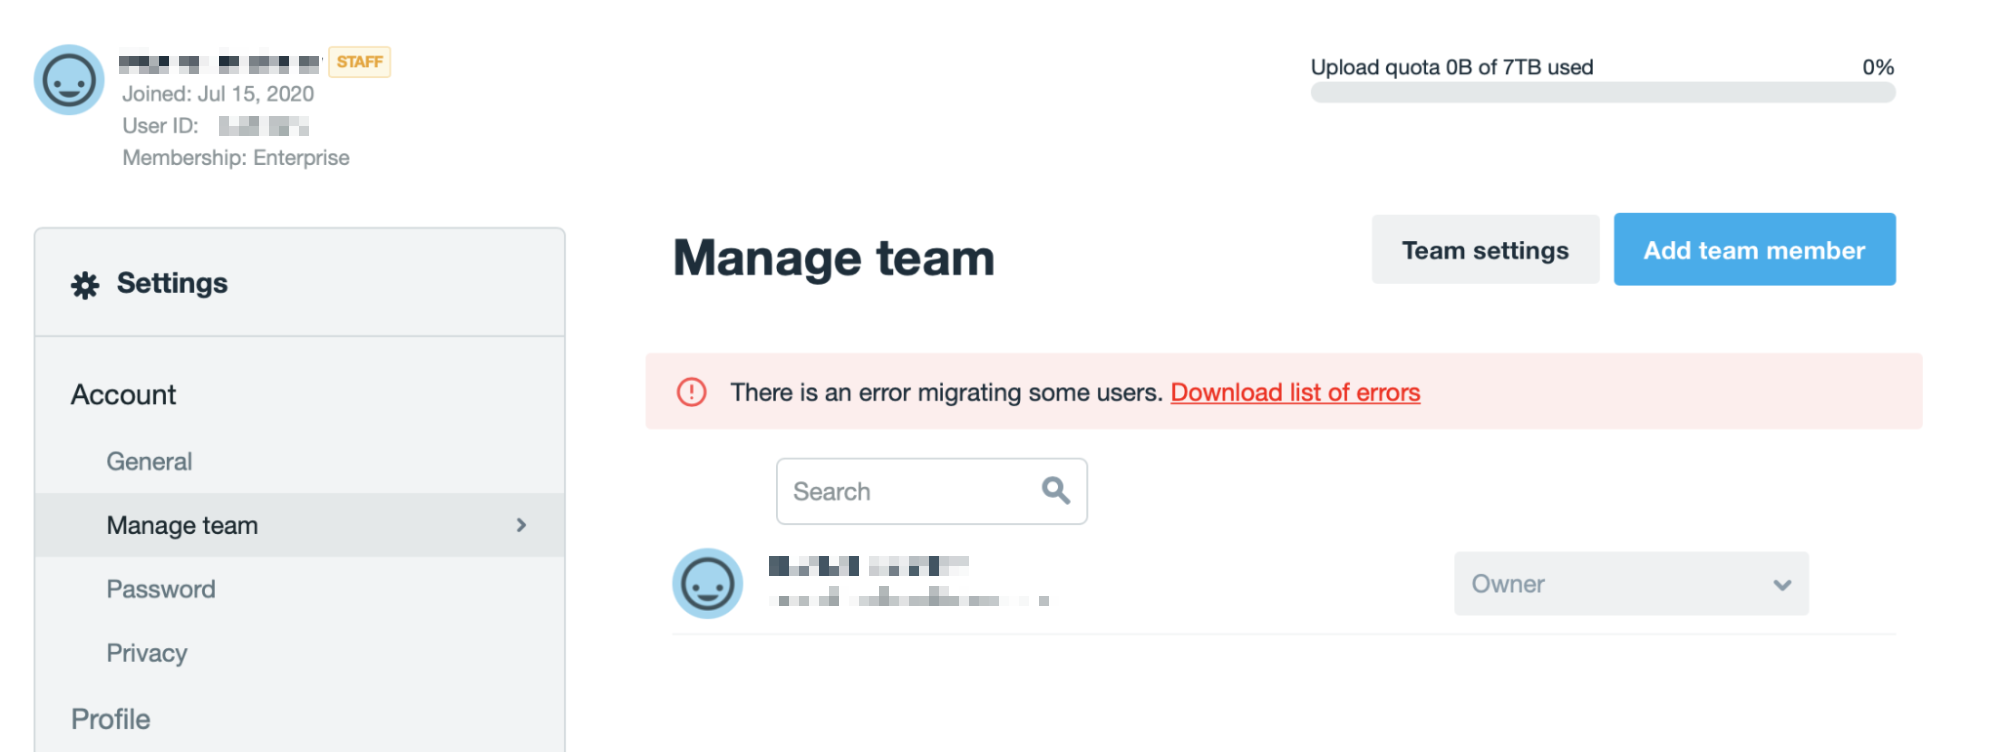 Vimeo manage team settings page, showing an error message that says 'There is an error migrating some users. Download a list of errors.' with a link to download a list of errors.